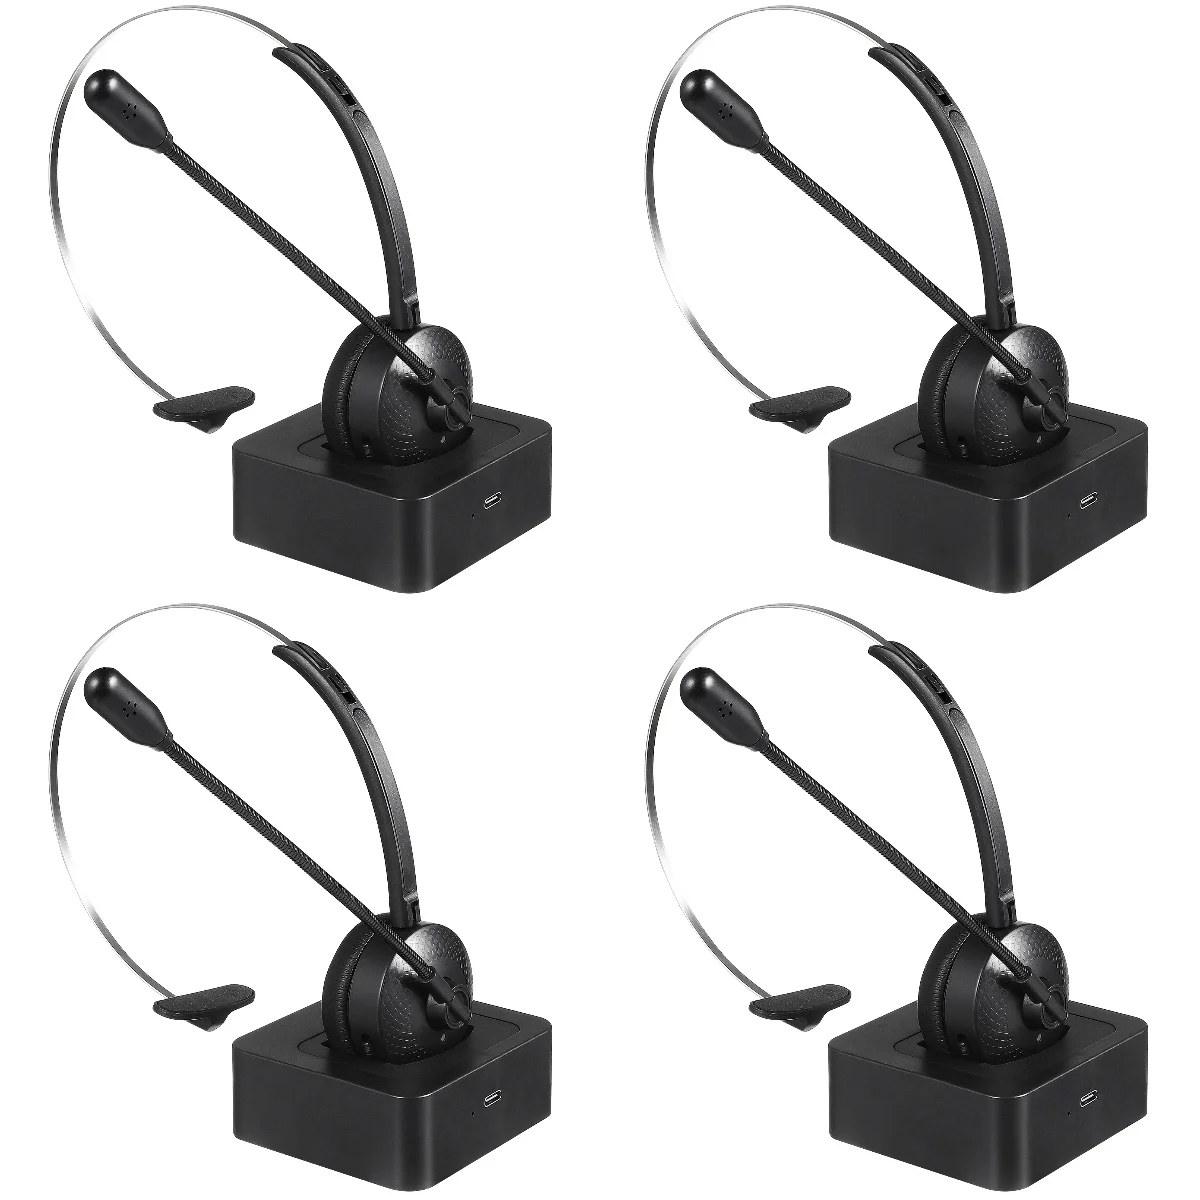 

4pcs .0 Wireless Headset Hands-free Call Earpiece with Noise Cancelling Microphone for Business Truck Driver